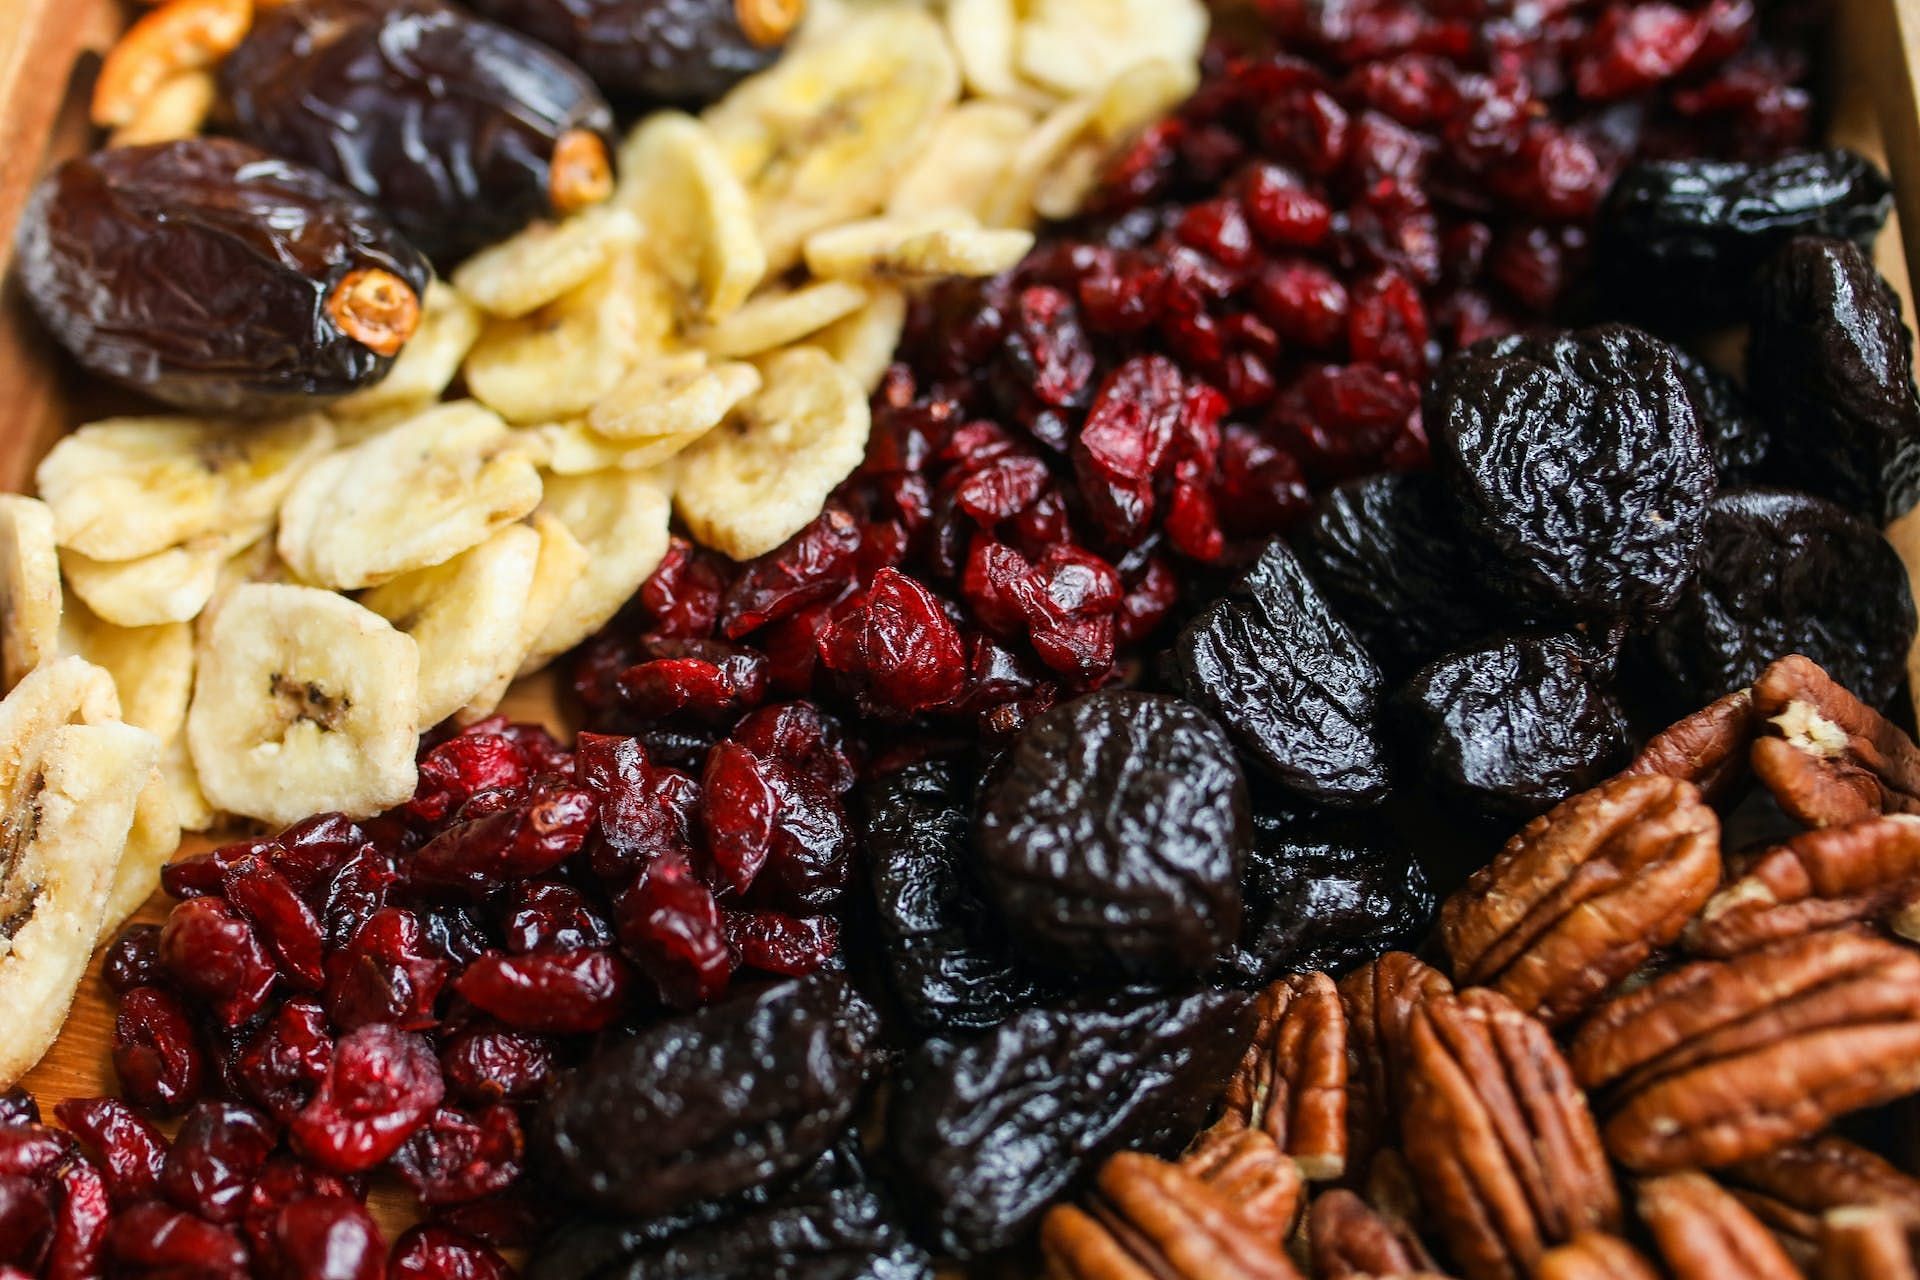 Dried fruits stick to the teeth and cause decay. (Image via Pexels/Polina Tankilevitch)